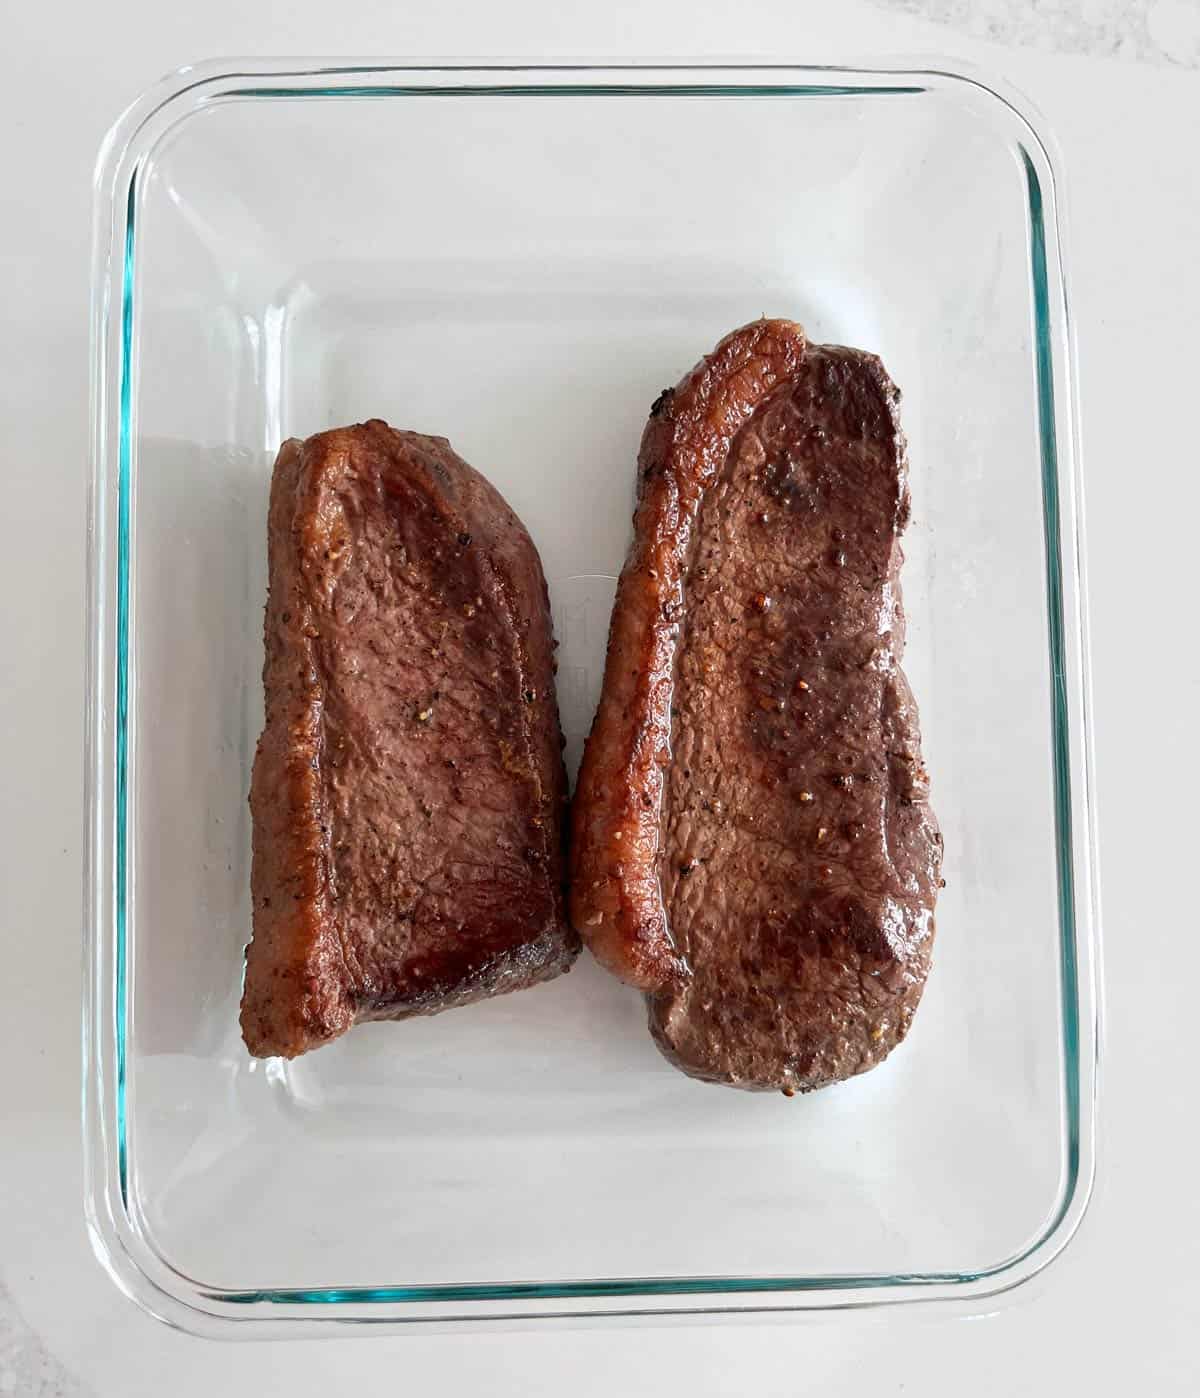 Picanha steak leftovers are stored in a glass food storage container.